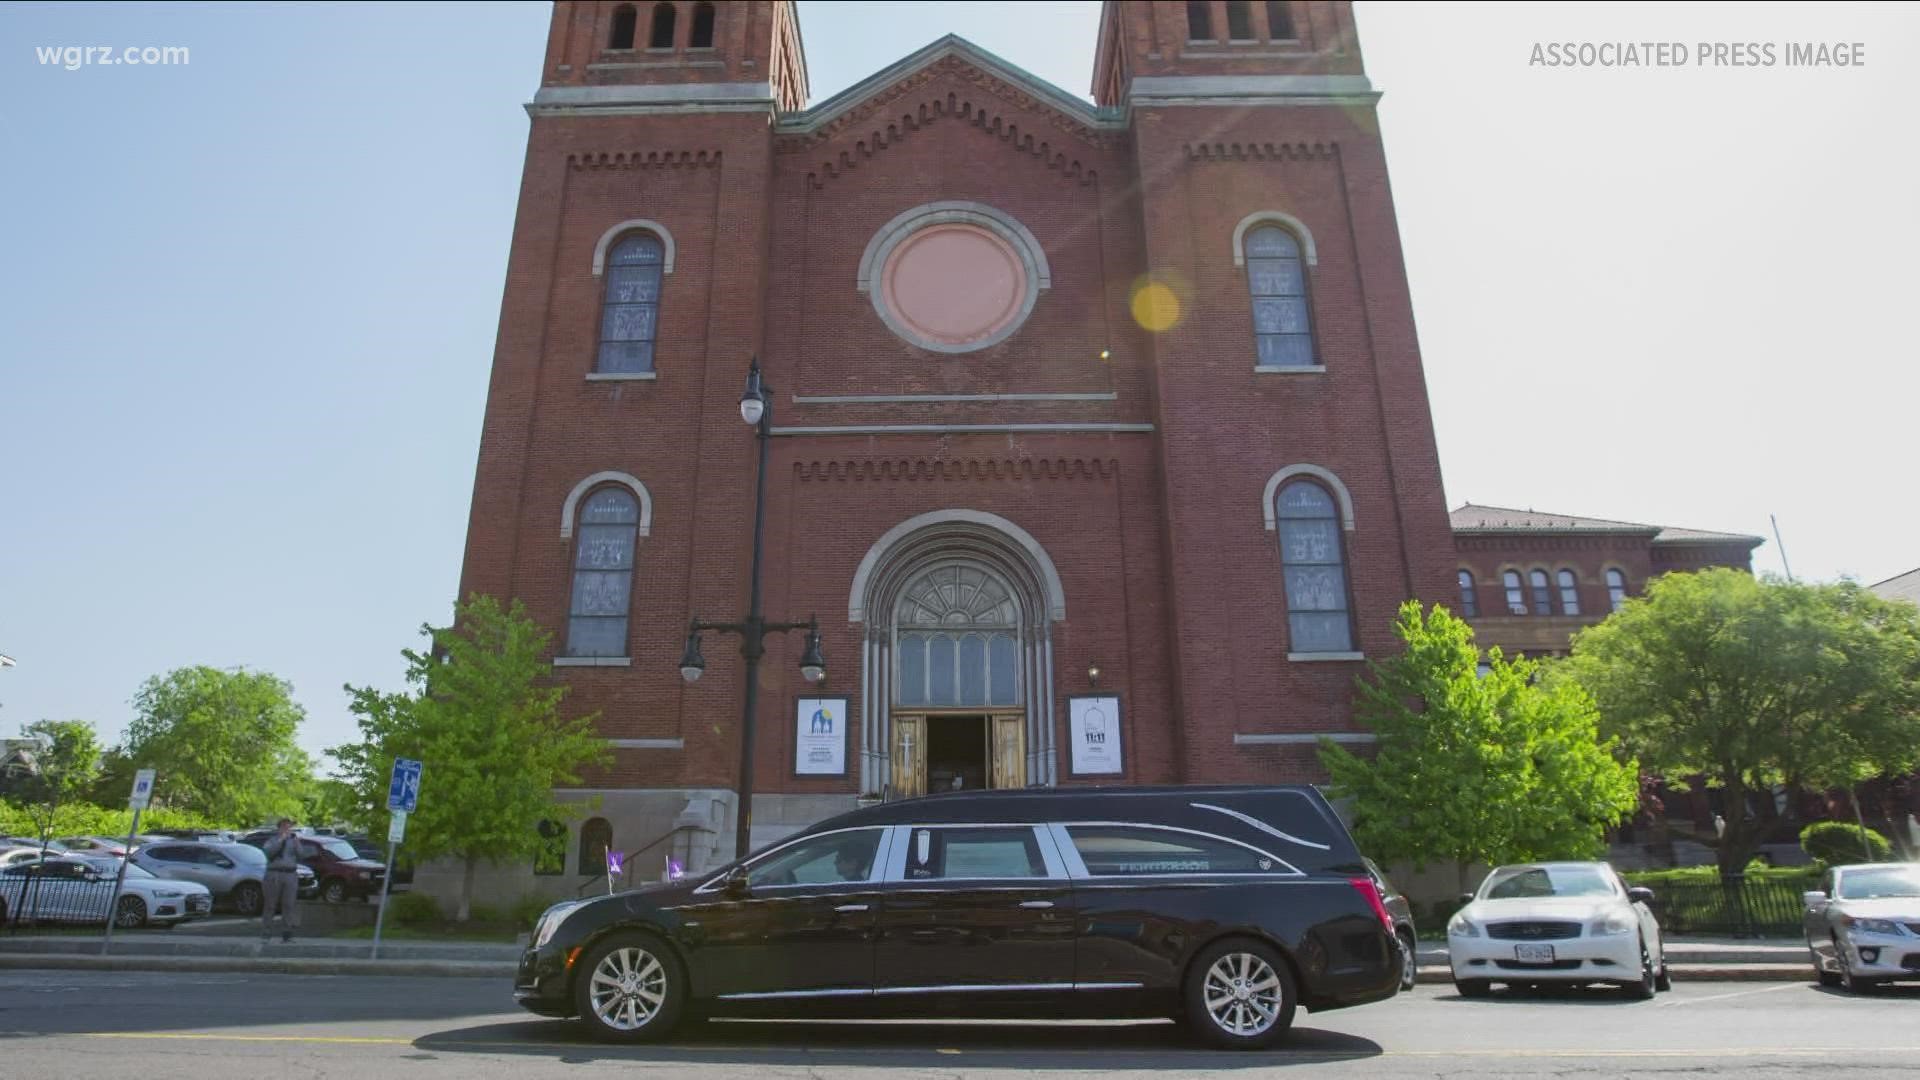 Roberta Drury was laid to rest in Syracuse Saturday with loved ones who mourned her death after the mass shooting last week that took her life.